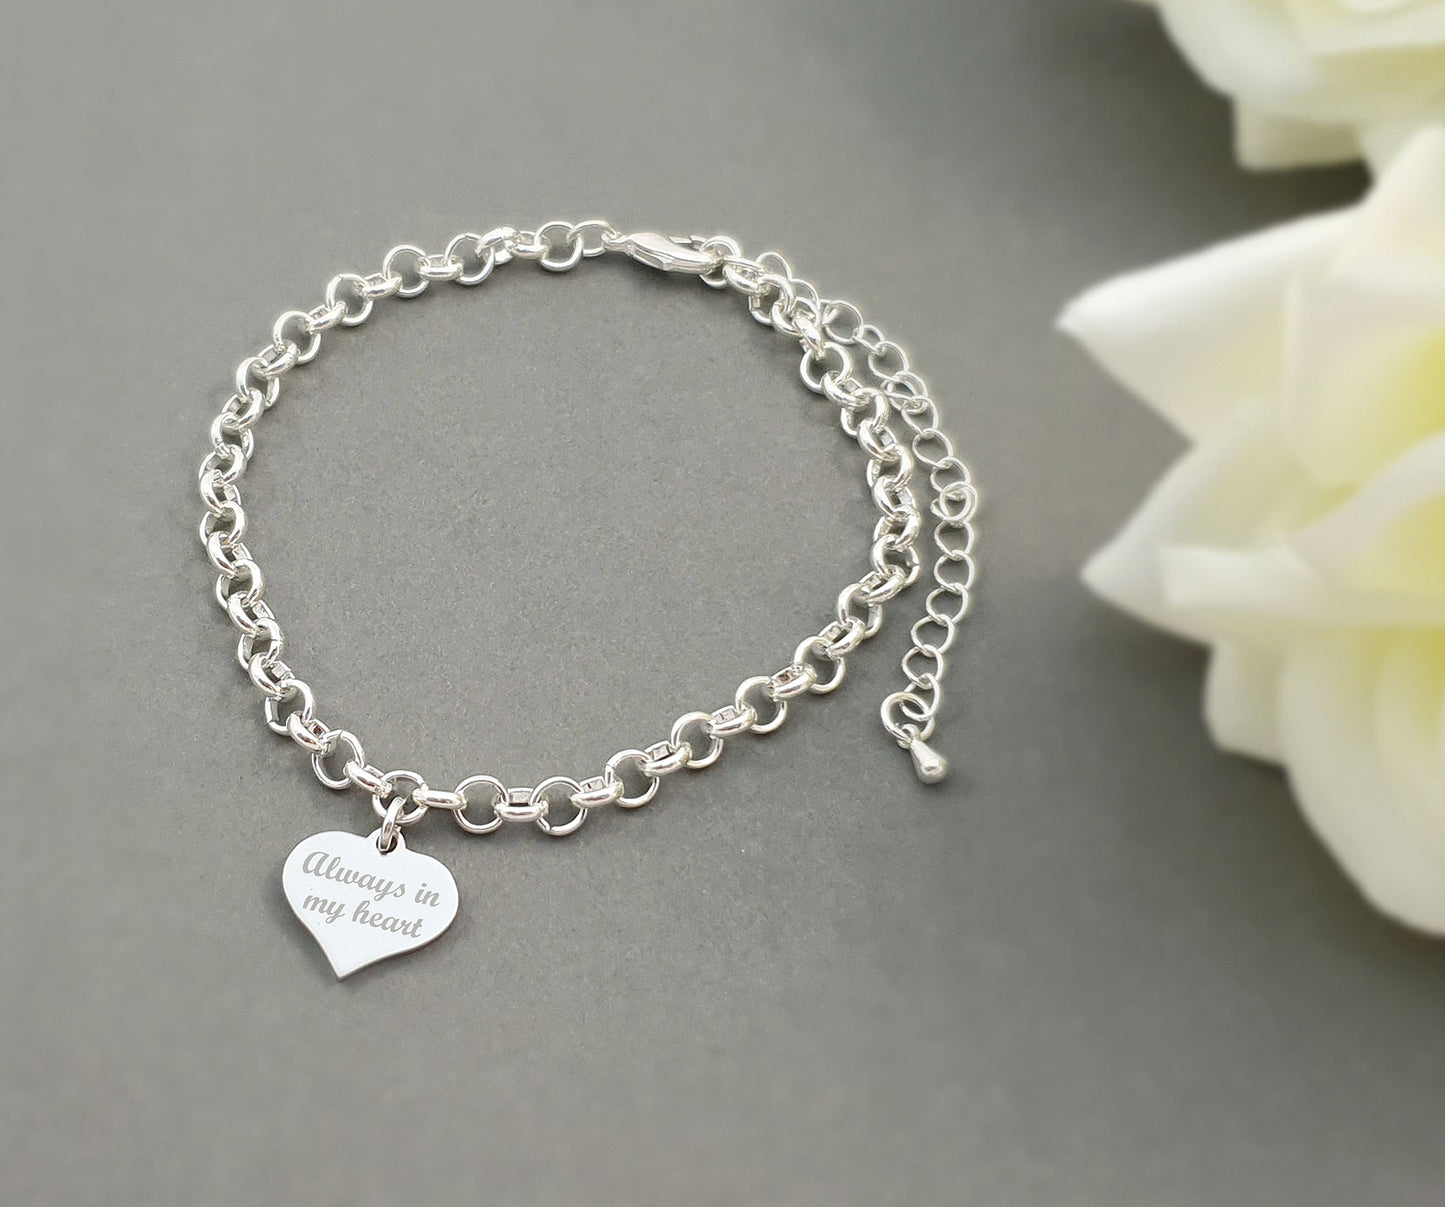 Paw Print Always in my Heart Engraved Heart Charm Link Bracelet Memorial Gift for Girl's and Women